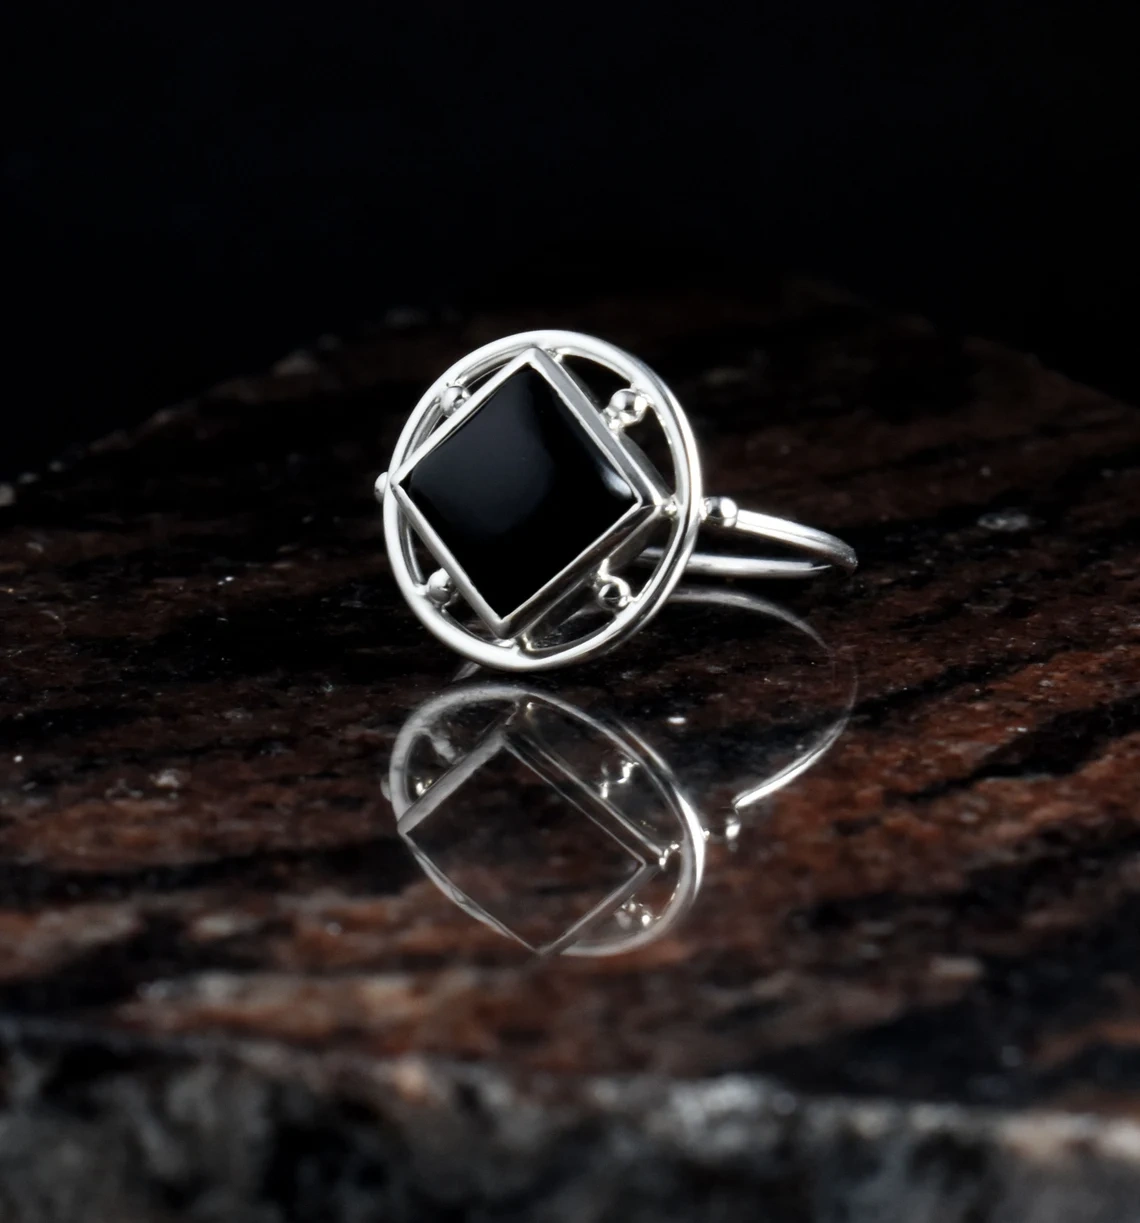 Black Onyx Square Smooth Stone 925 Sterling Silver Ring Promise Ring, Stone Ring, Dainty Ring, Unique Ring, Black Stone Ring-11431472